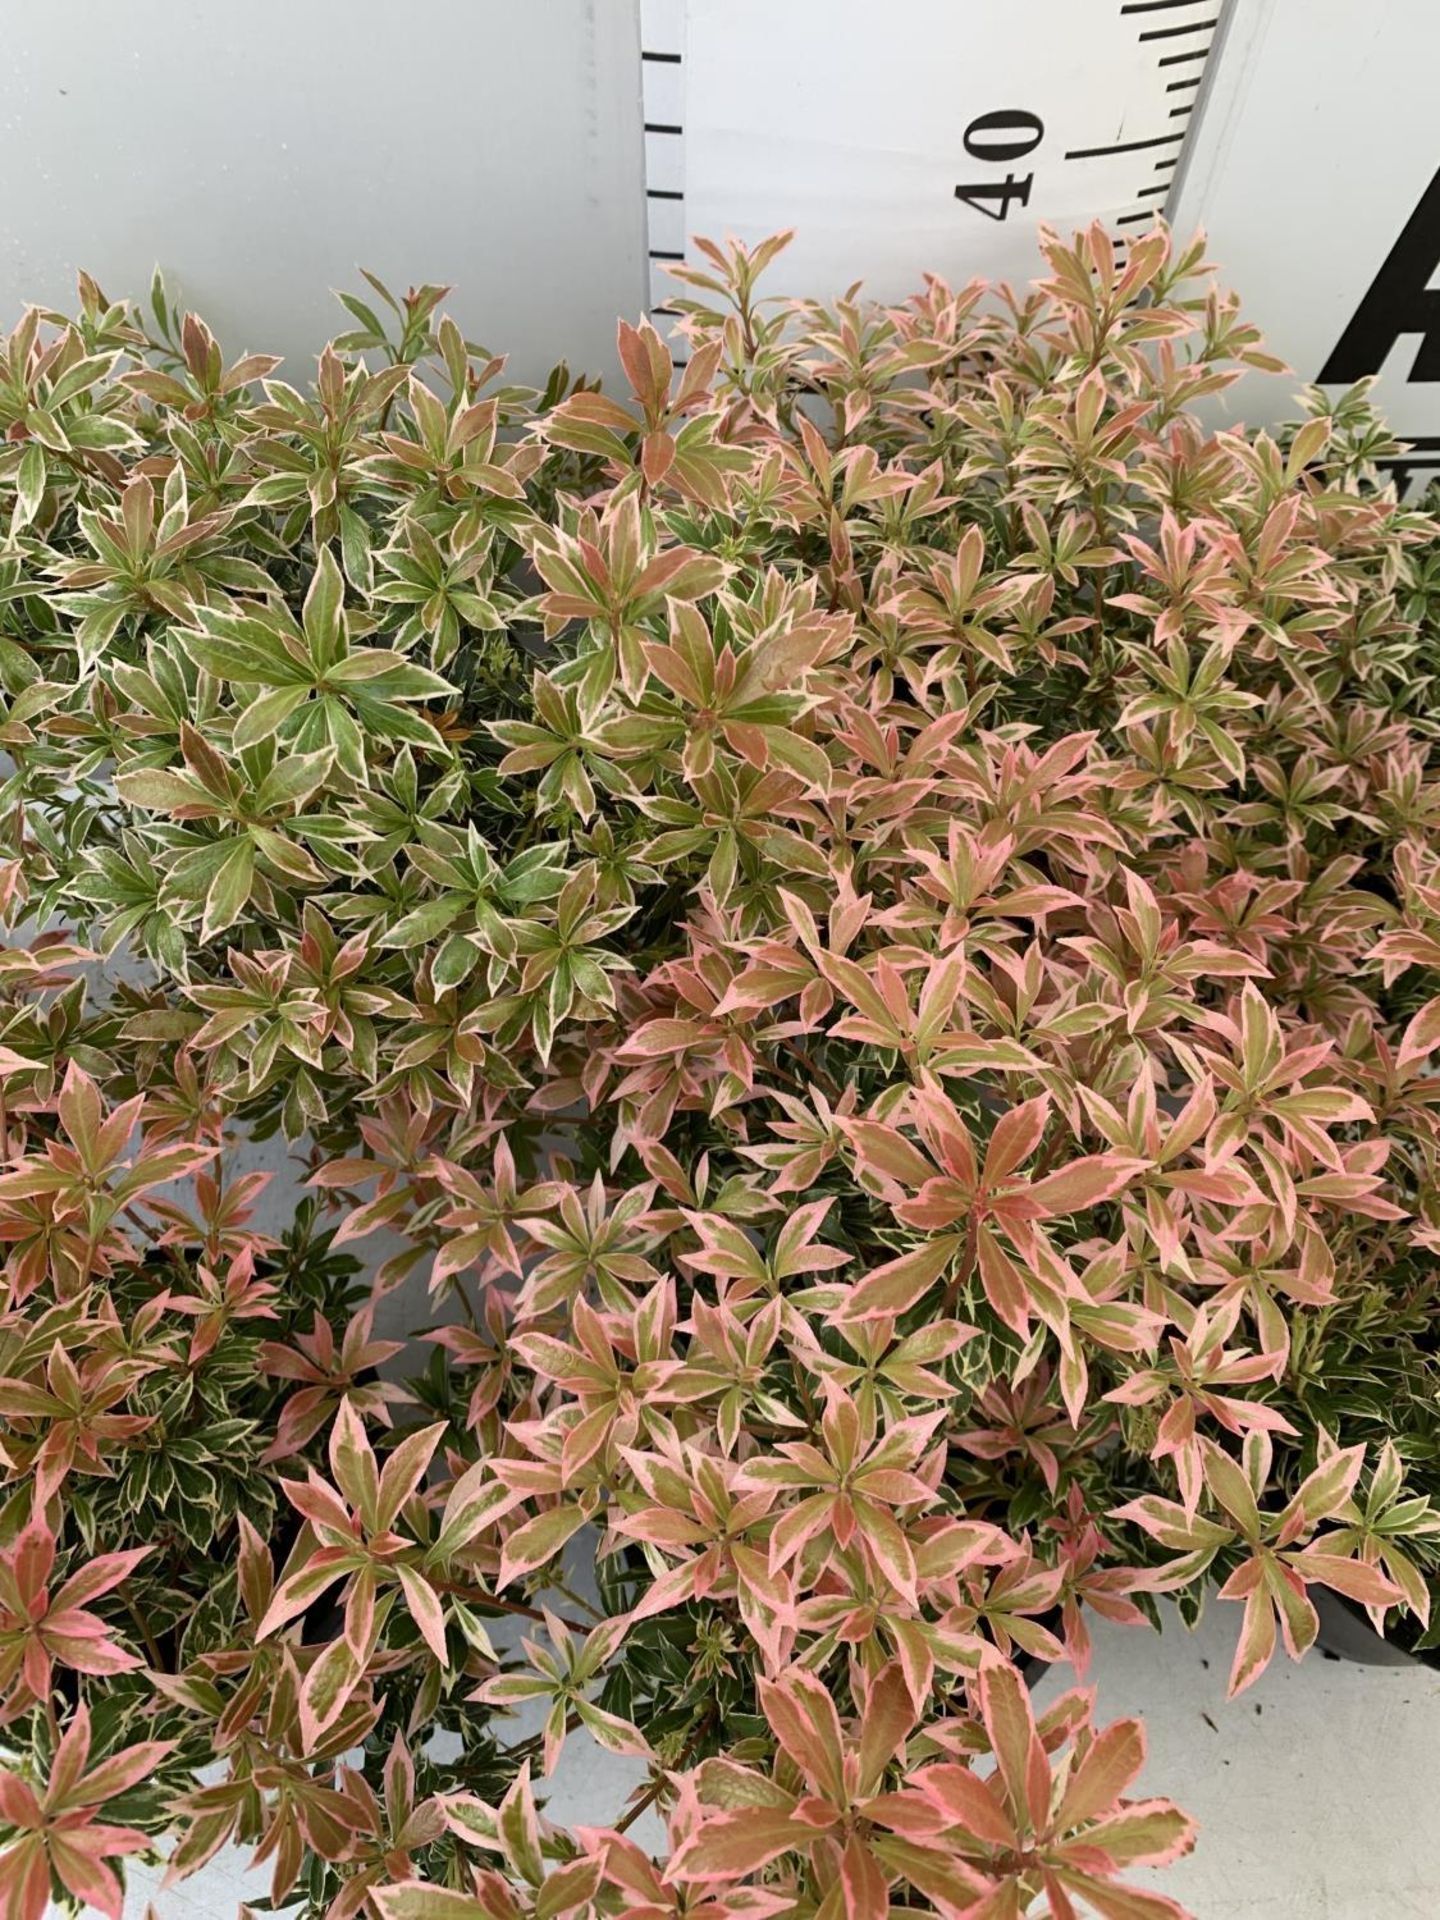 SEVEN PIERIS LITTLE HEATH 45CM TALL IN 2 LTR POTS TO BE SOLD FOR THE SEVEN PLUS VAT - Image 8 of 13